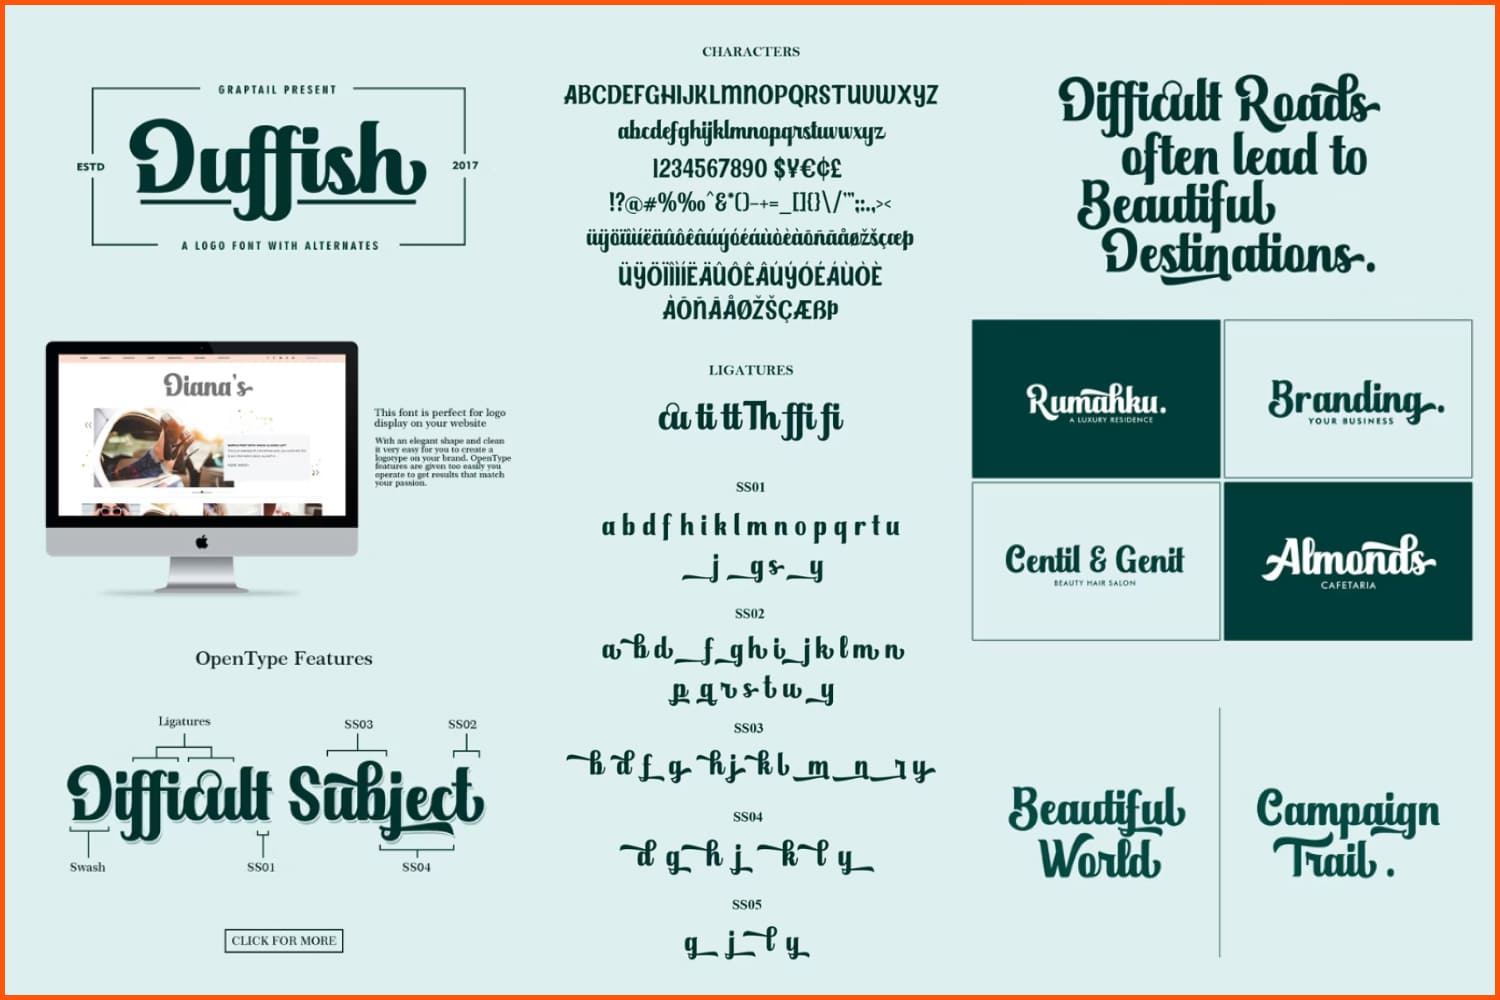 Green Text in Duffish fonts on a light background.